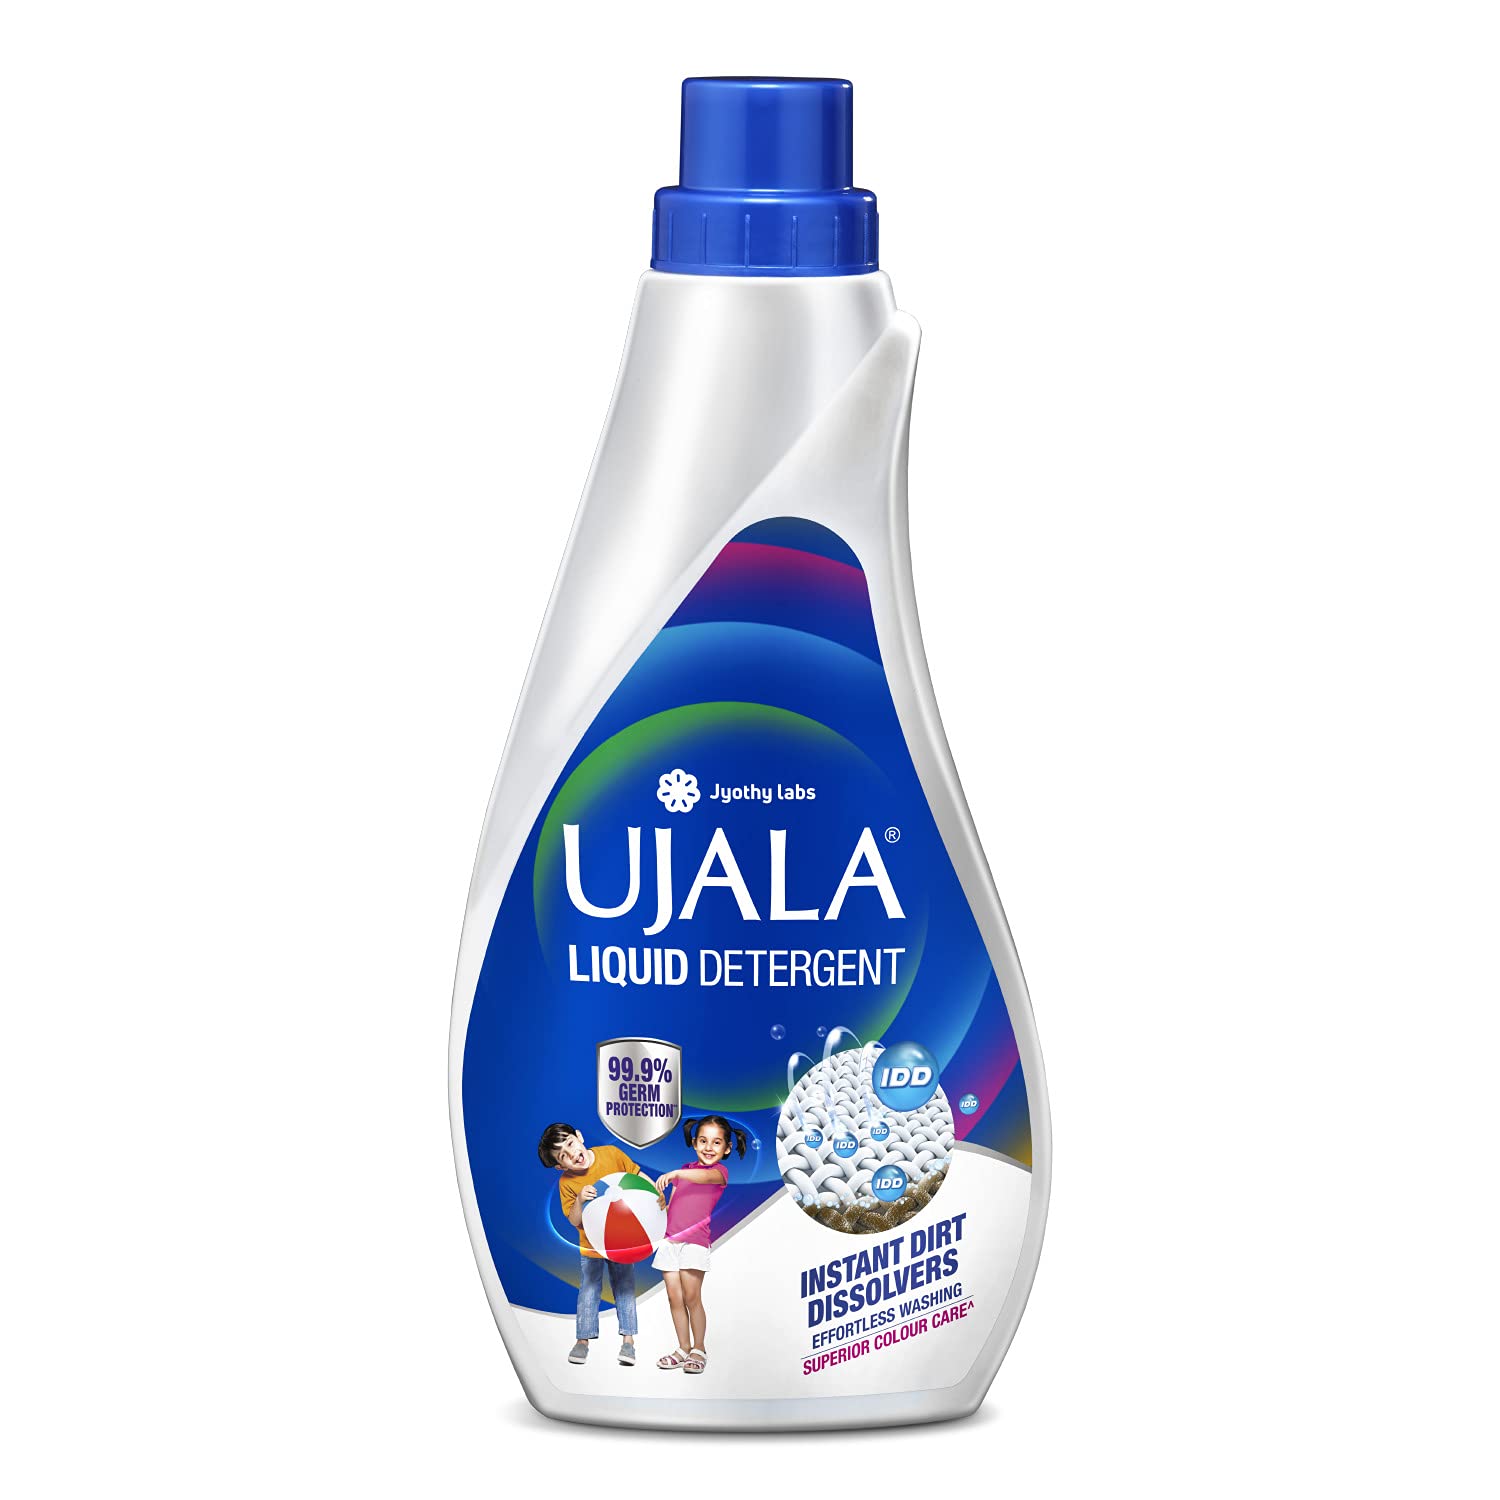 UJALA Liquid Detergent with IDD (Instant Dirt Dissolver) for Ease of Washing and Superior Color Care